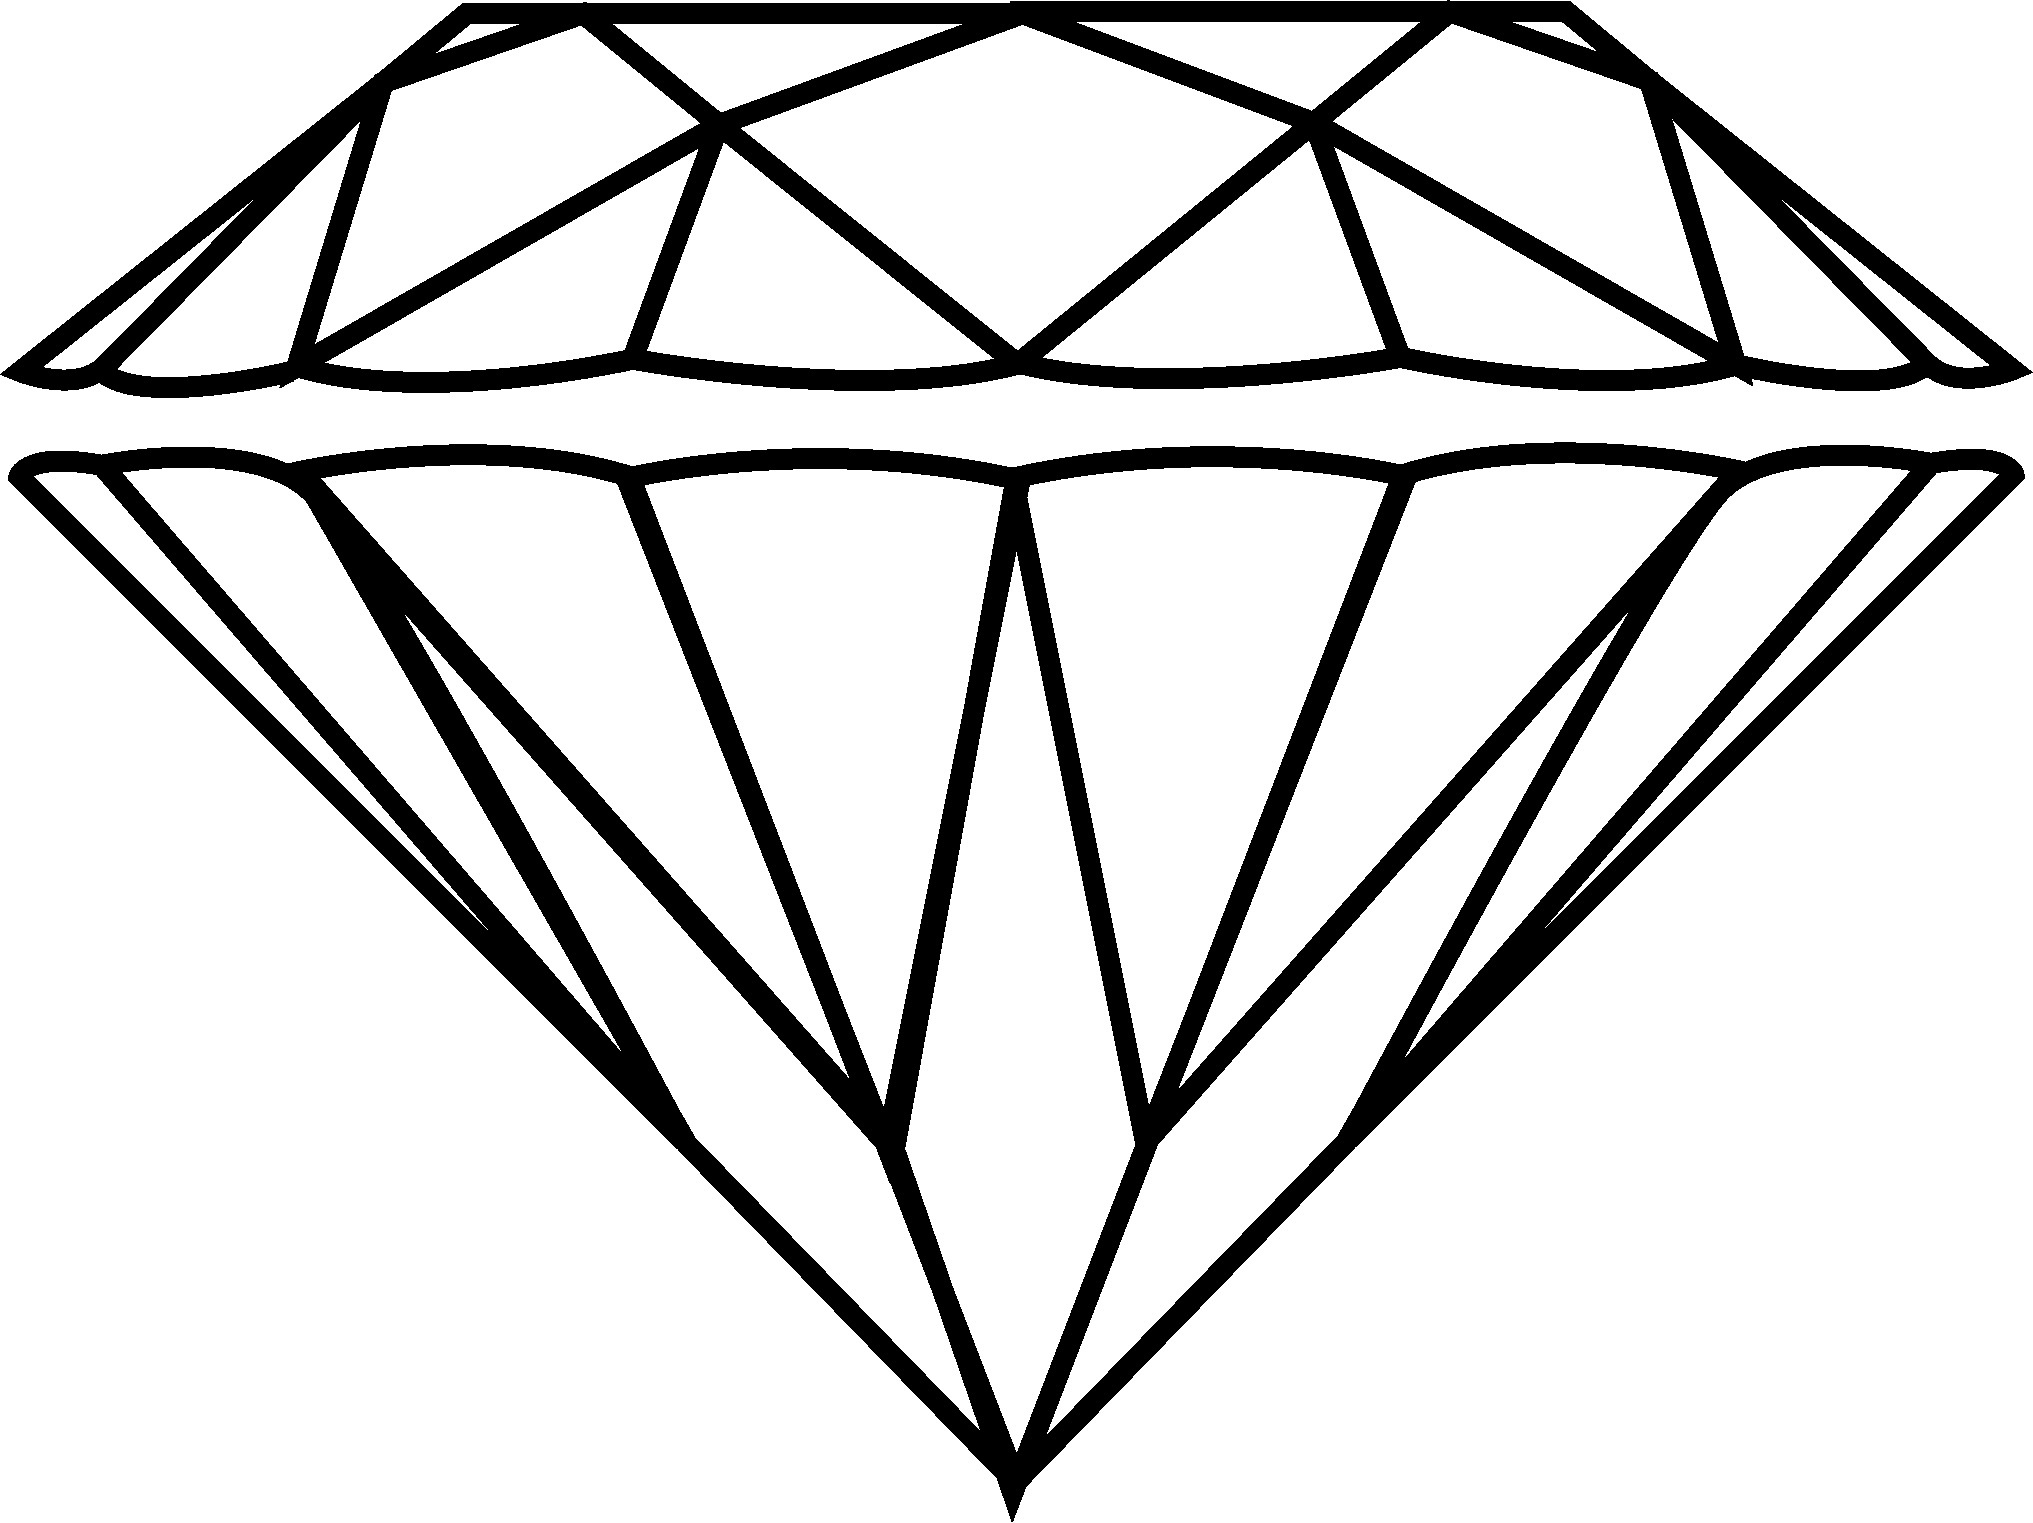 baseball-diamond-drawing-free-download-on-clipartmag